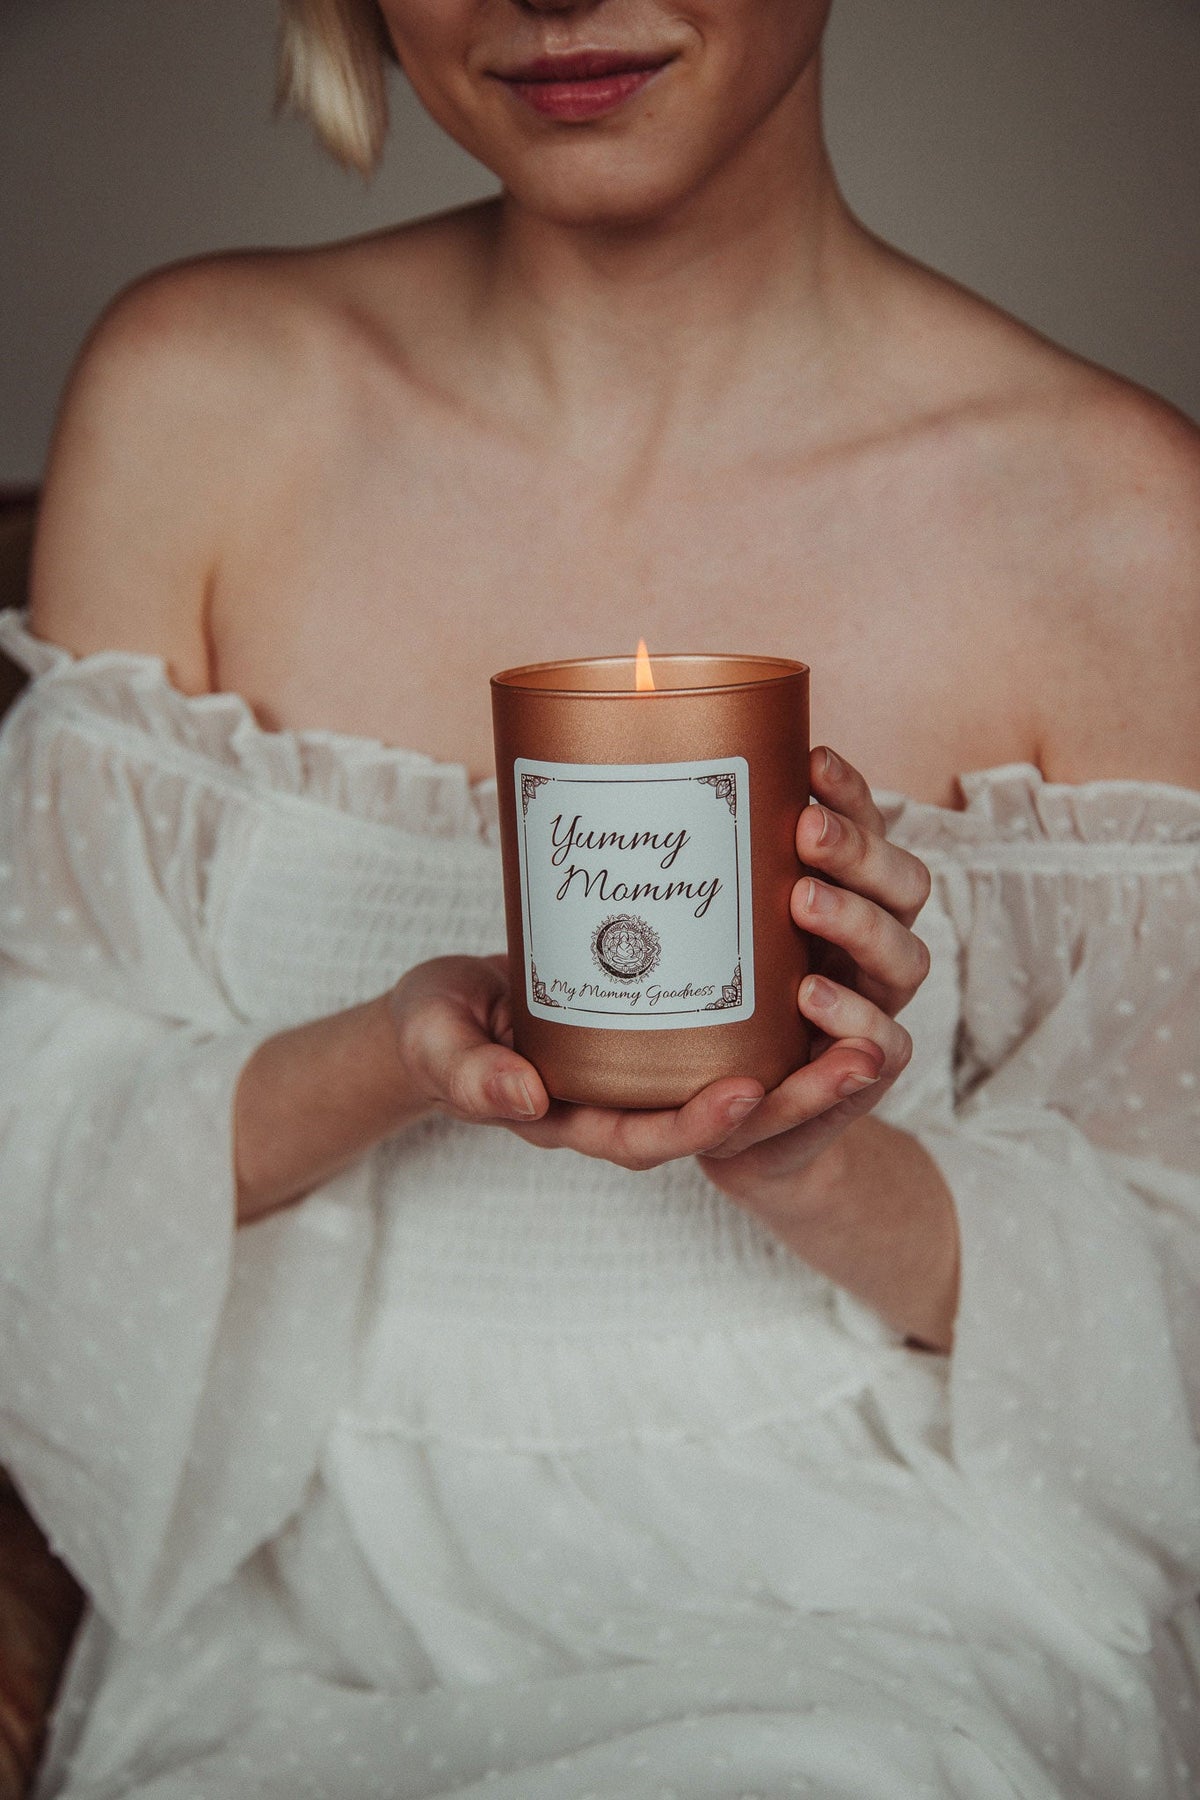 Yummy Mommy Candle - My Mommy Goodness